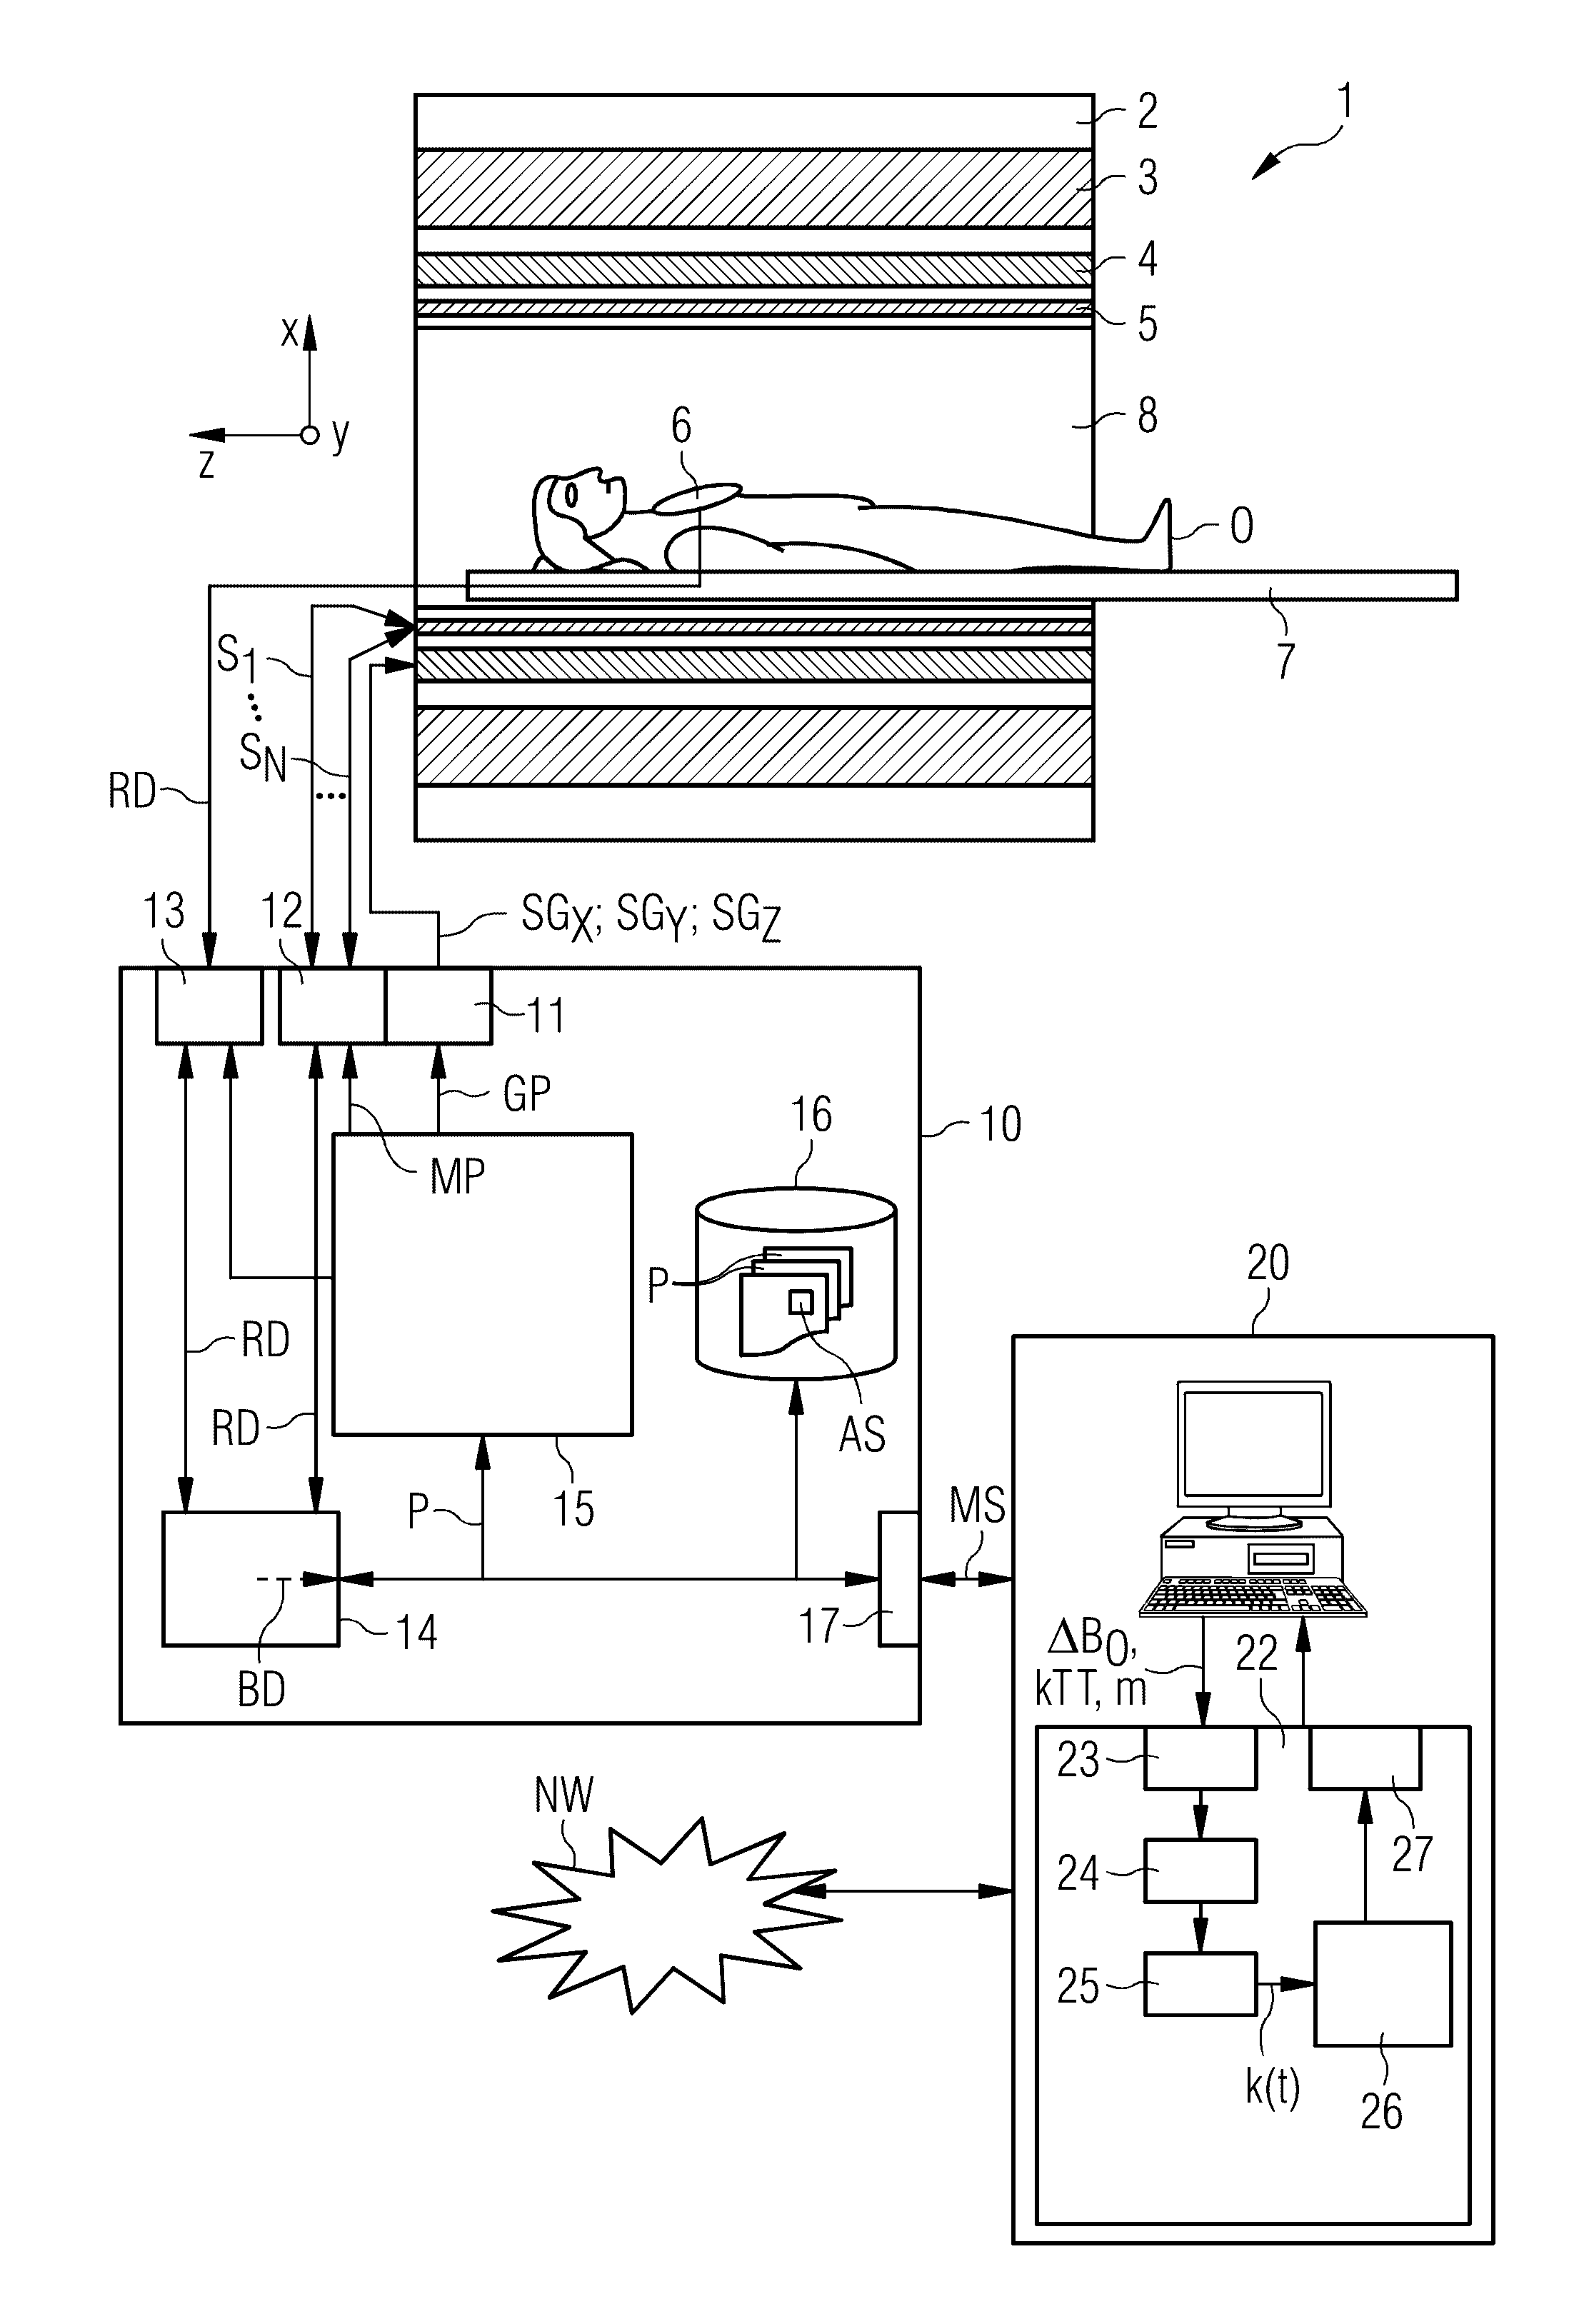 Determination of a magnetic resonance system activation sequence